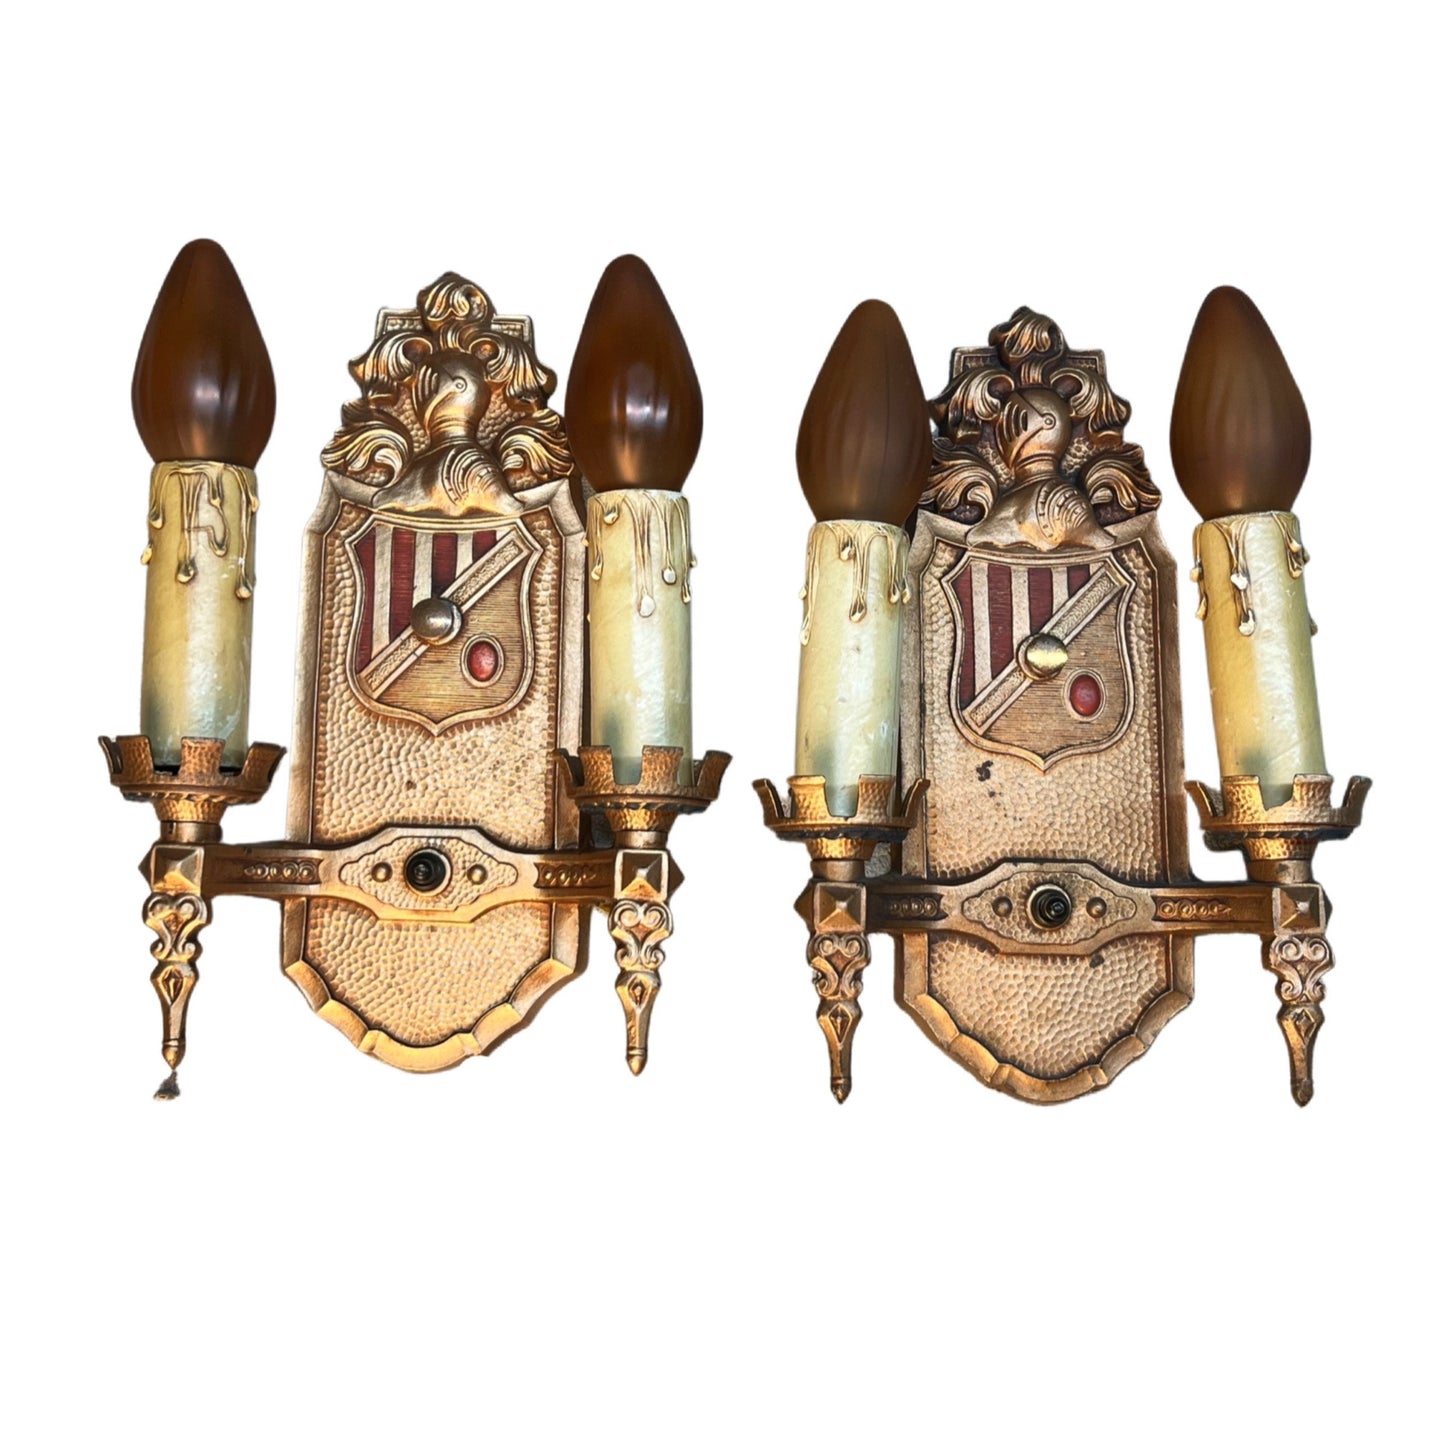 Markel Double sconces with knight, shield and original finish